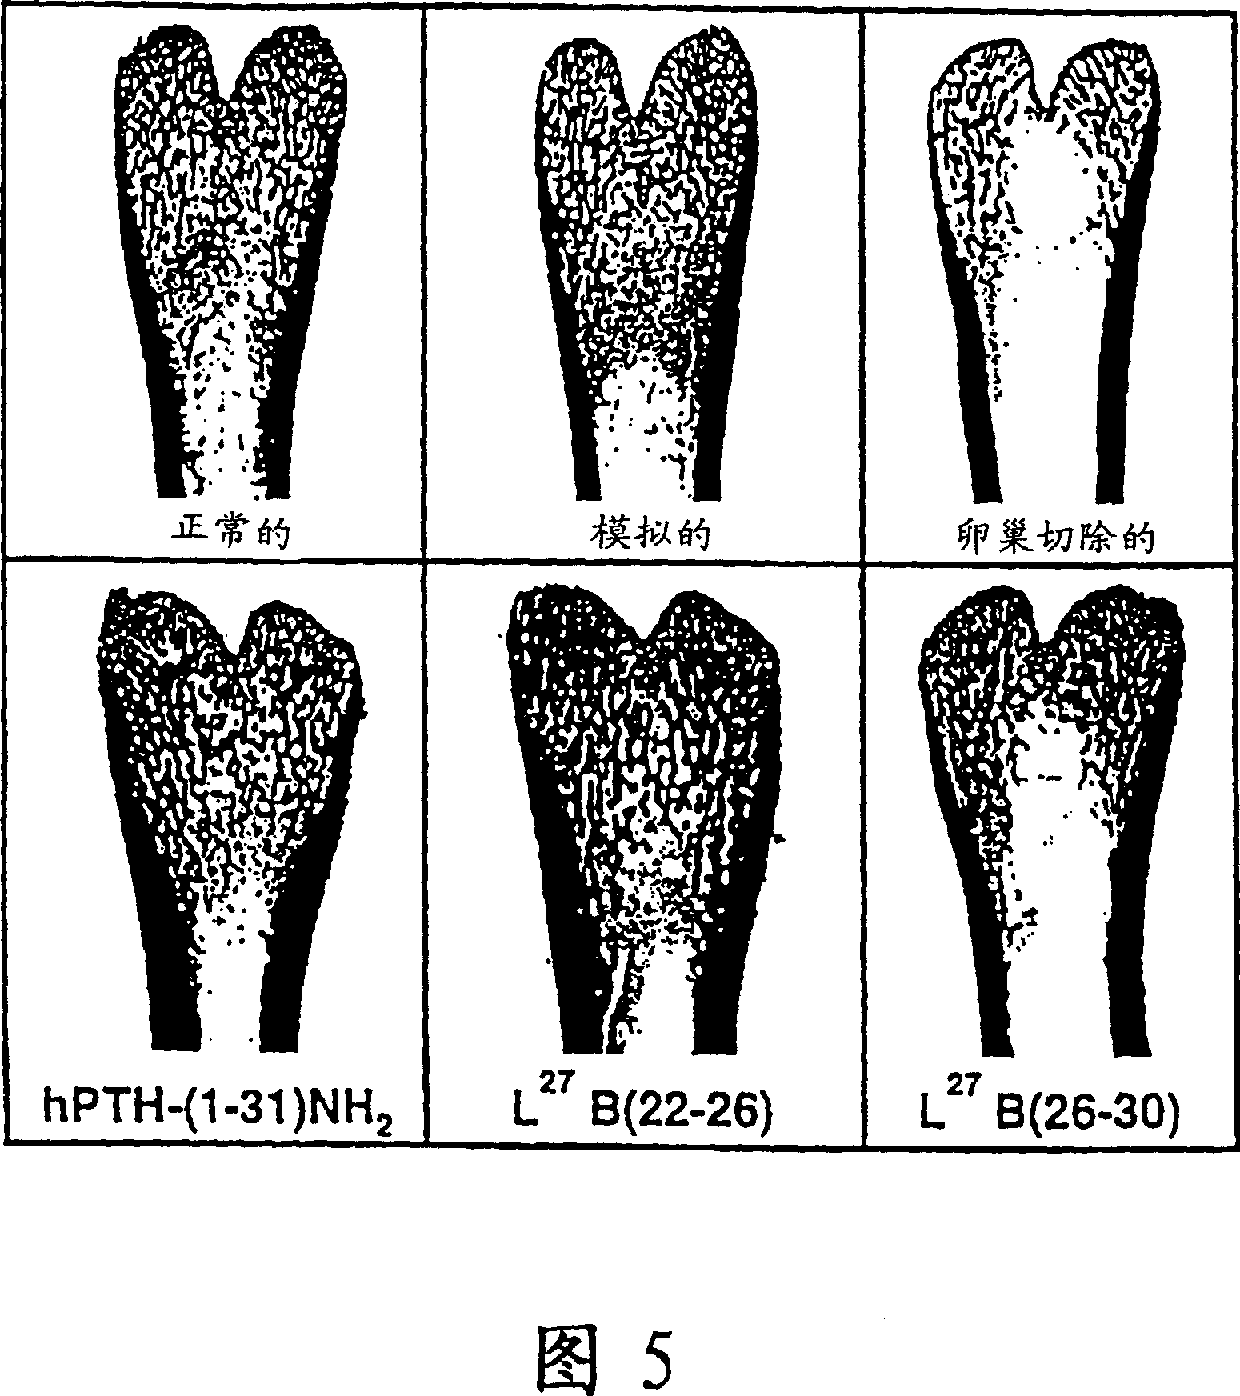 Parathyroid hormone analogues for the treatment of osteoporosis